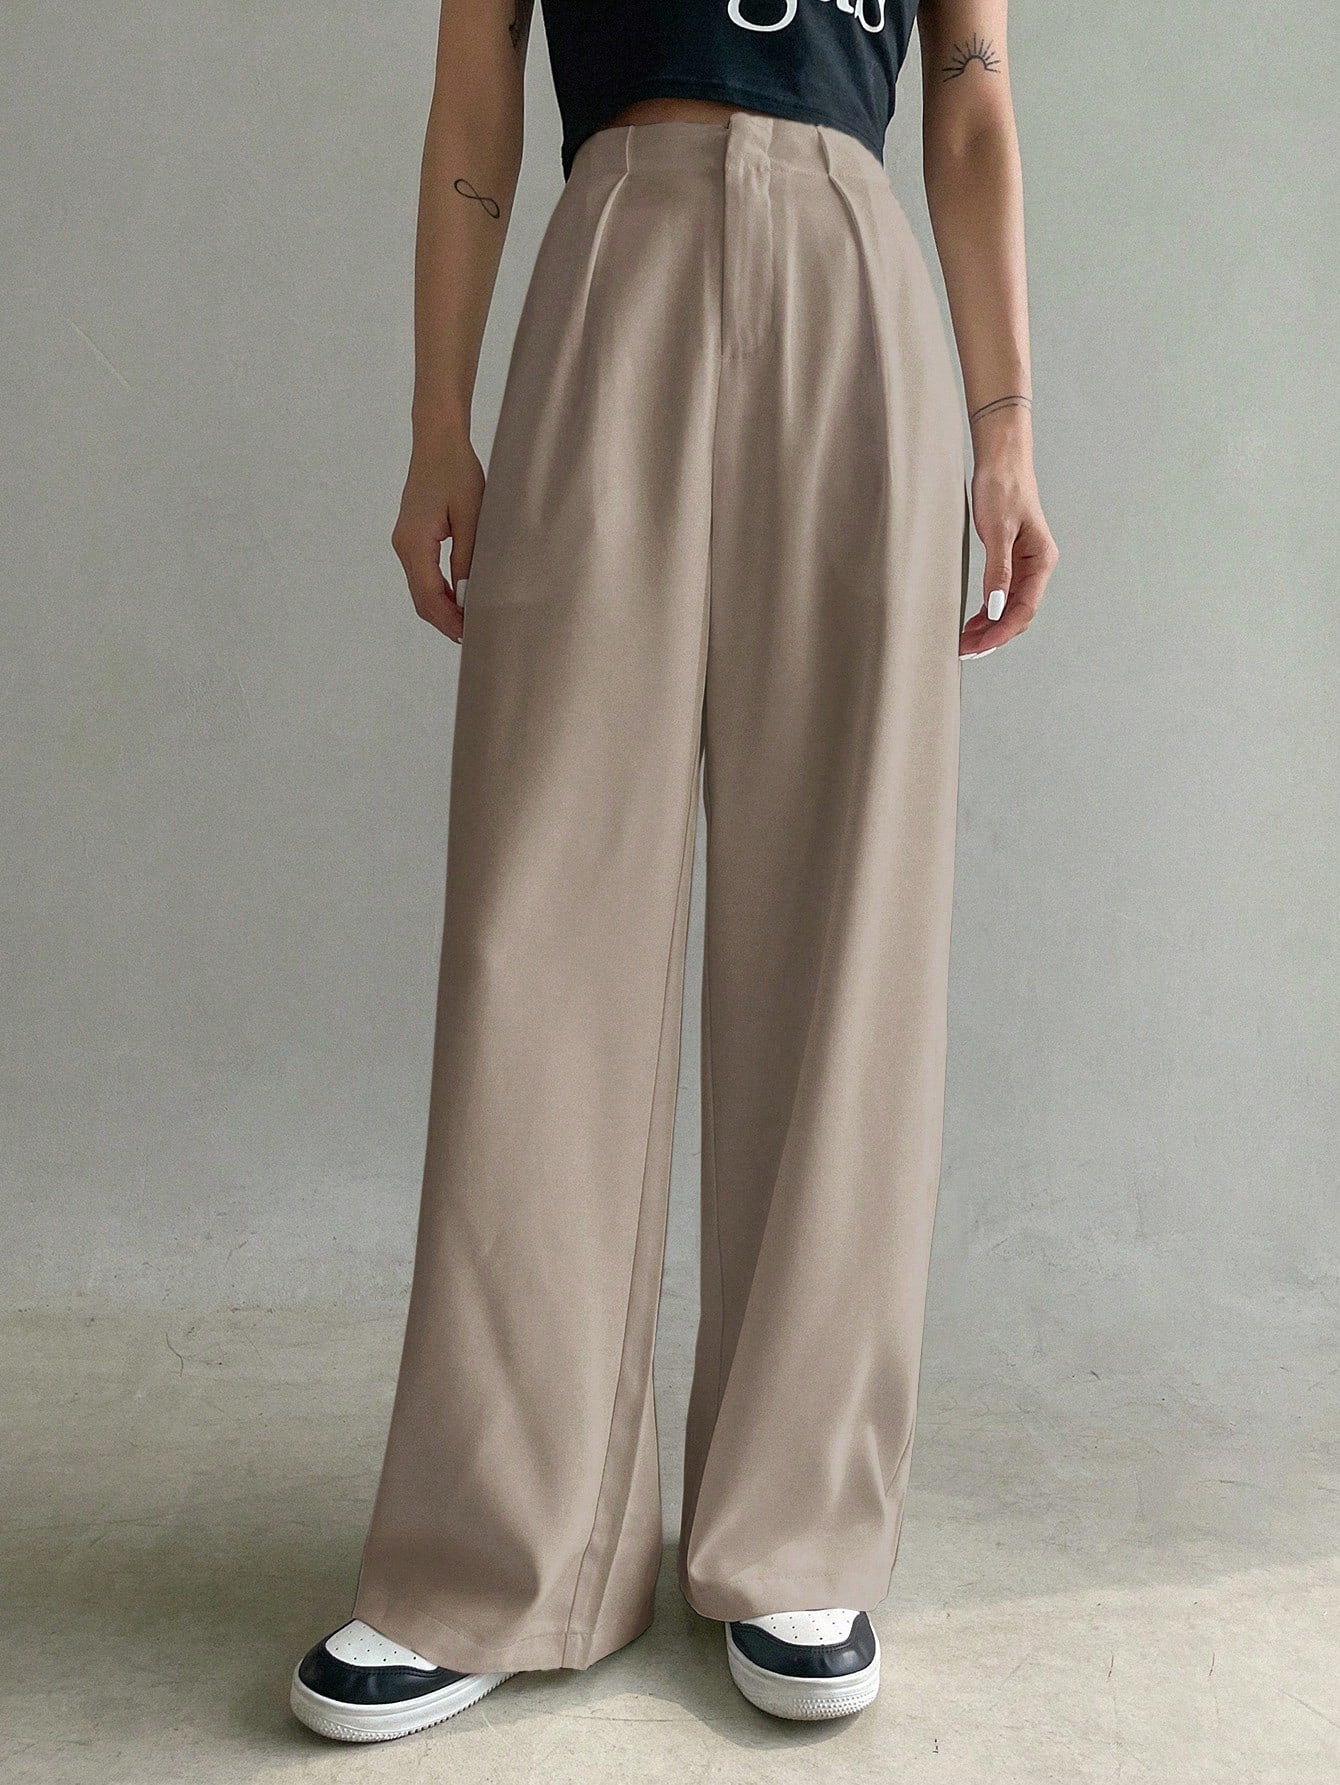 Women's Solid Color Pleated High Waist Loose Casual Suit Pants